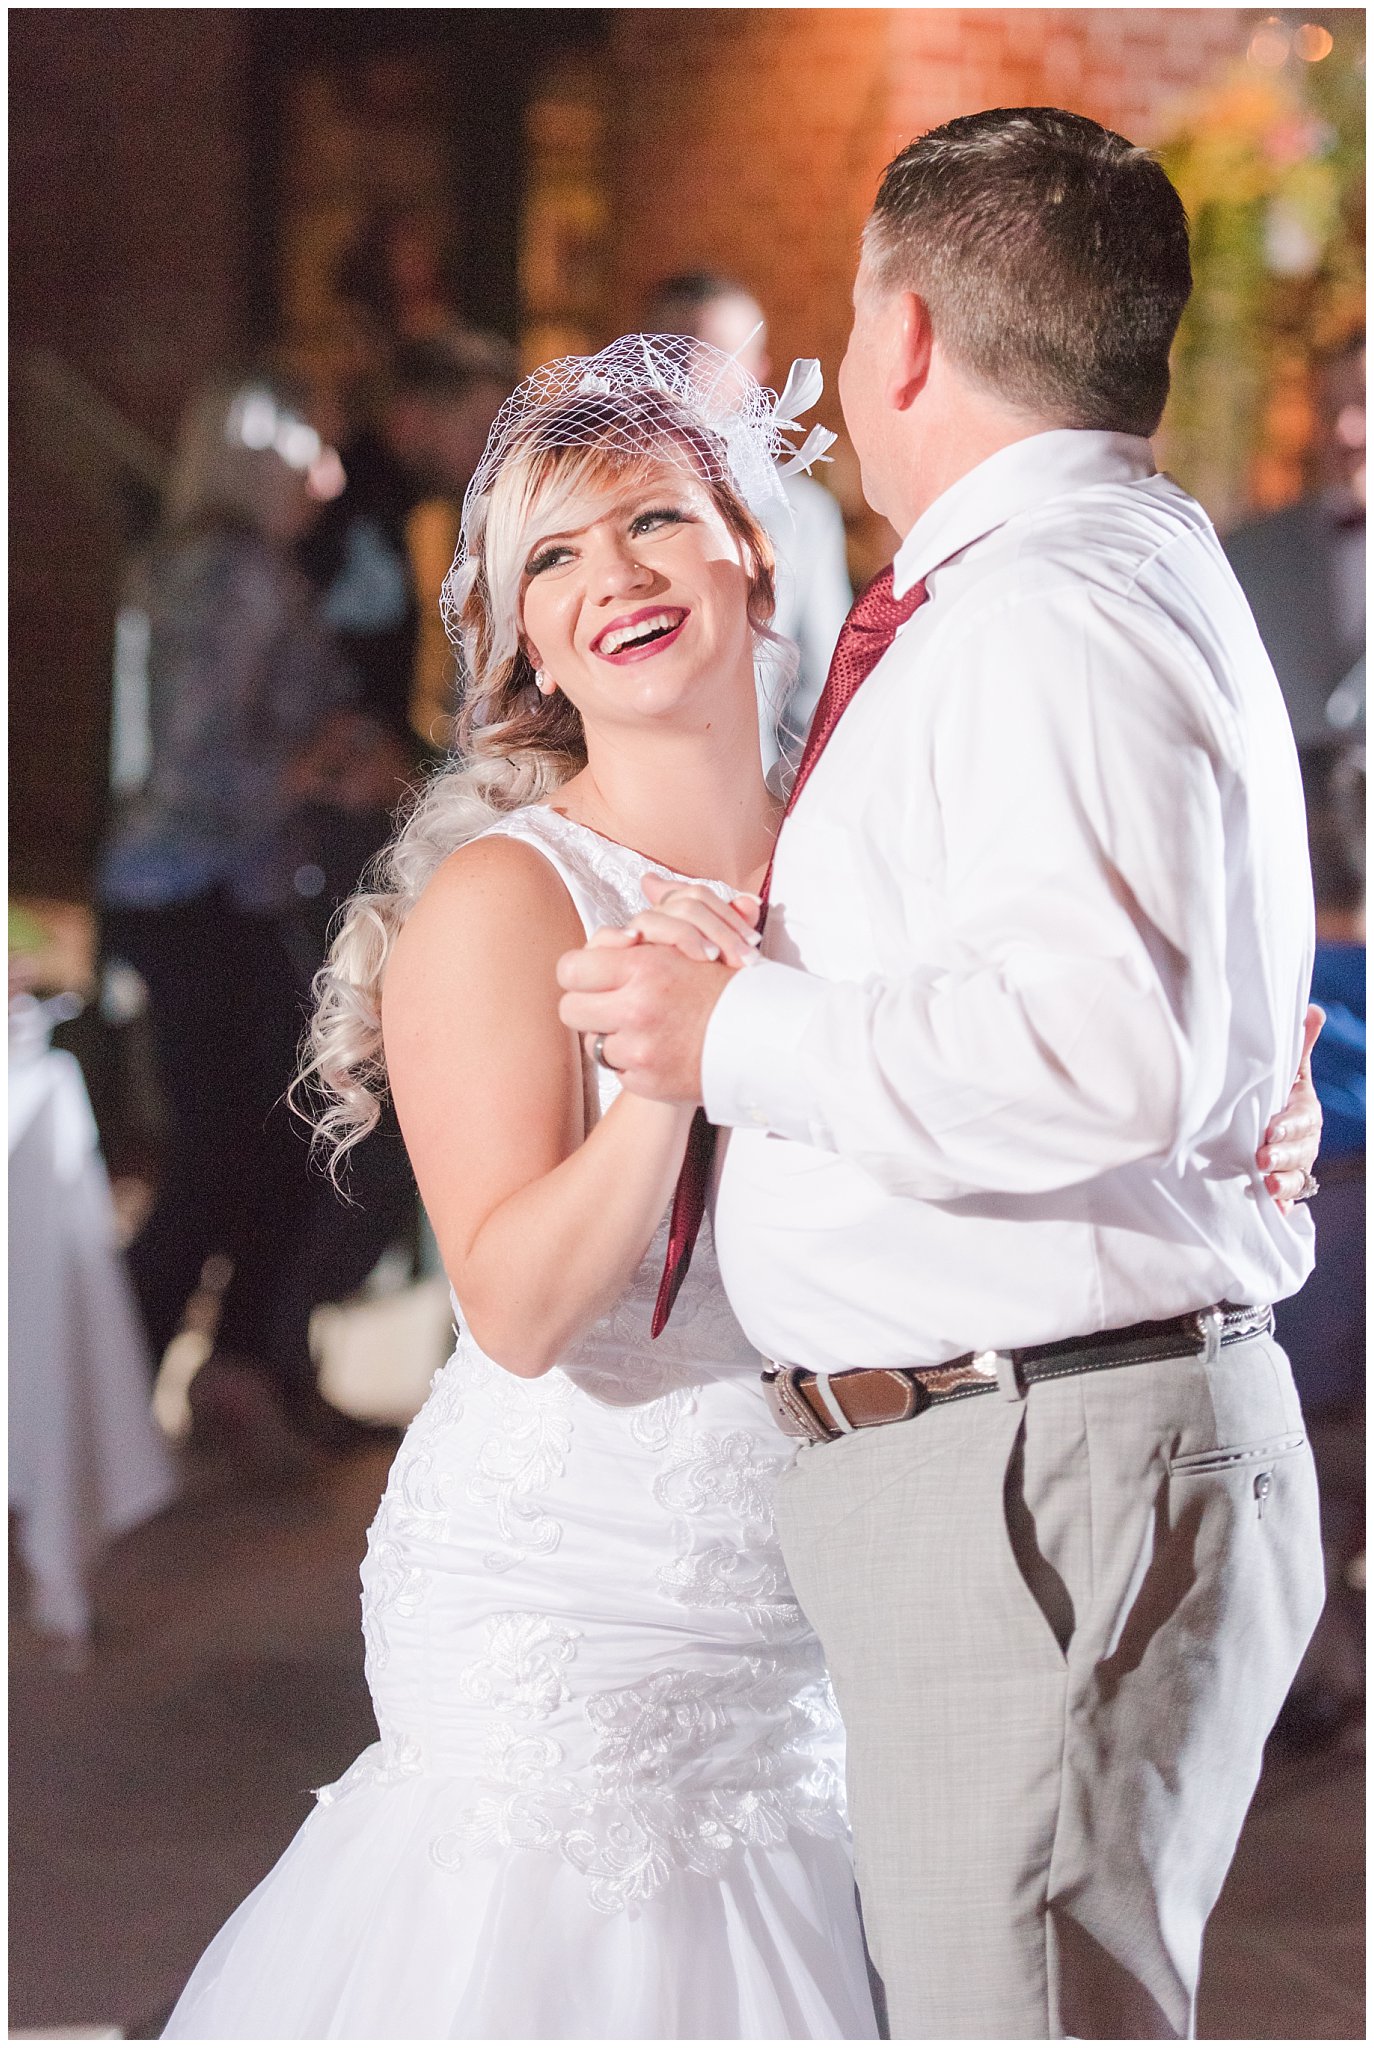 Bride dances with father during wedding reception | Top Utah Wedding and Couples Photos 2019 | Jessie and Dallin Photography